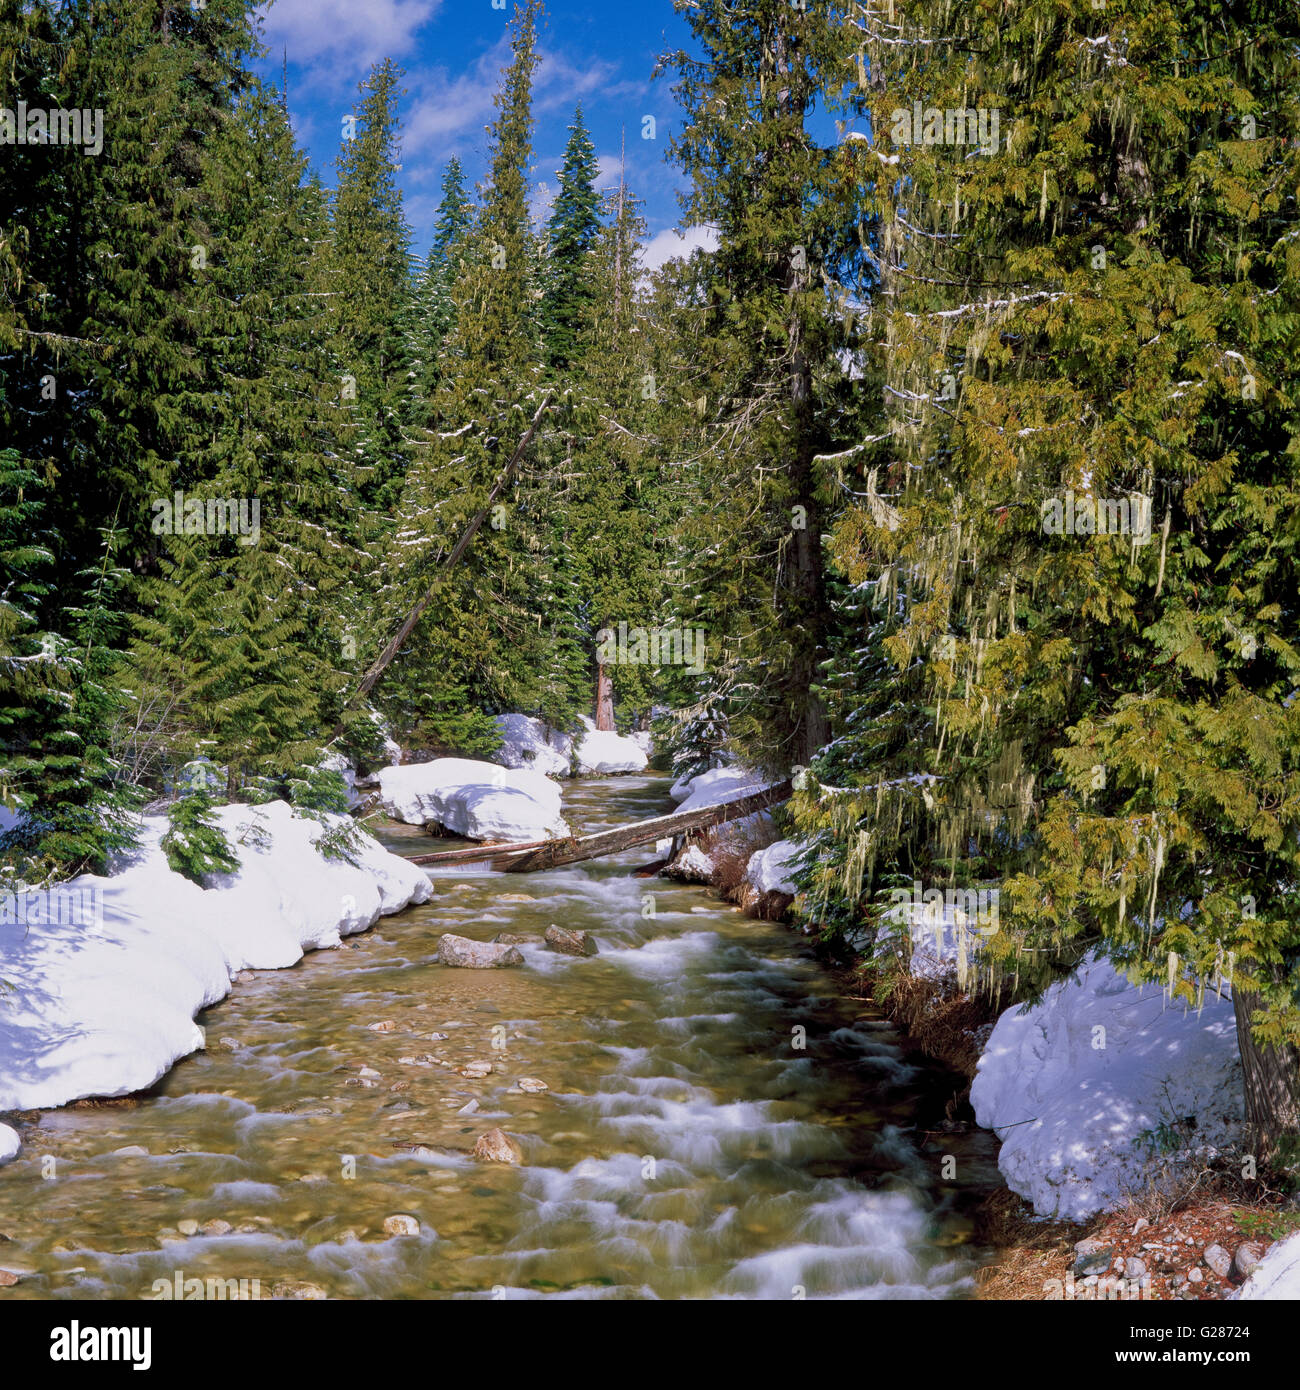 squaw creek in winter in the lochsa river basin of north-central idaho Stock Photo